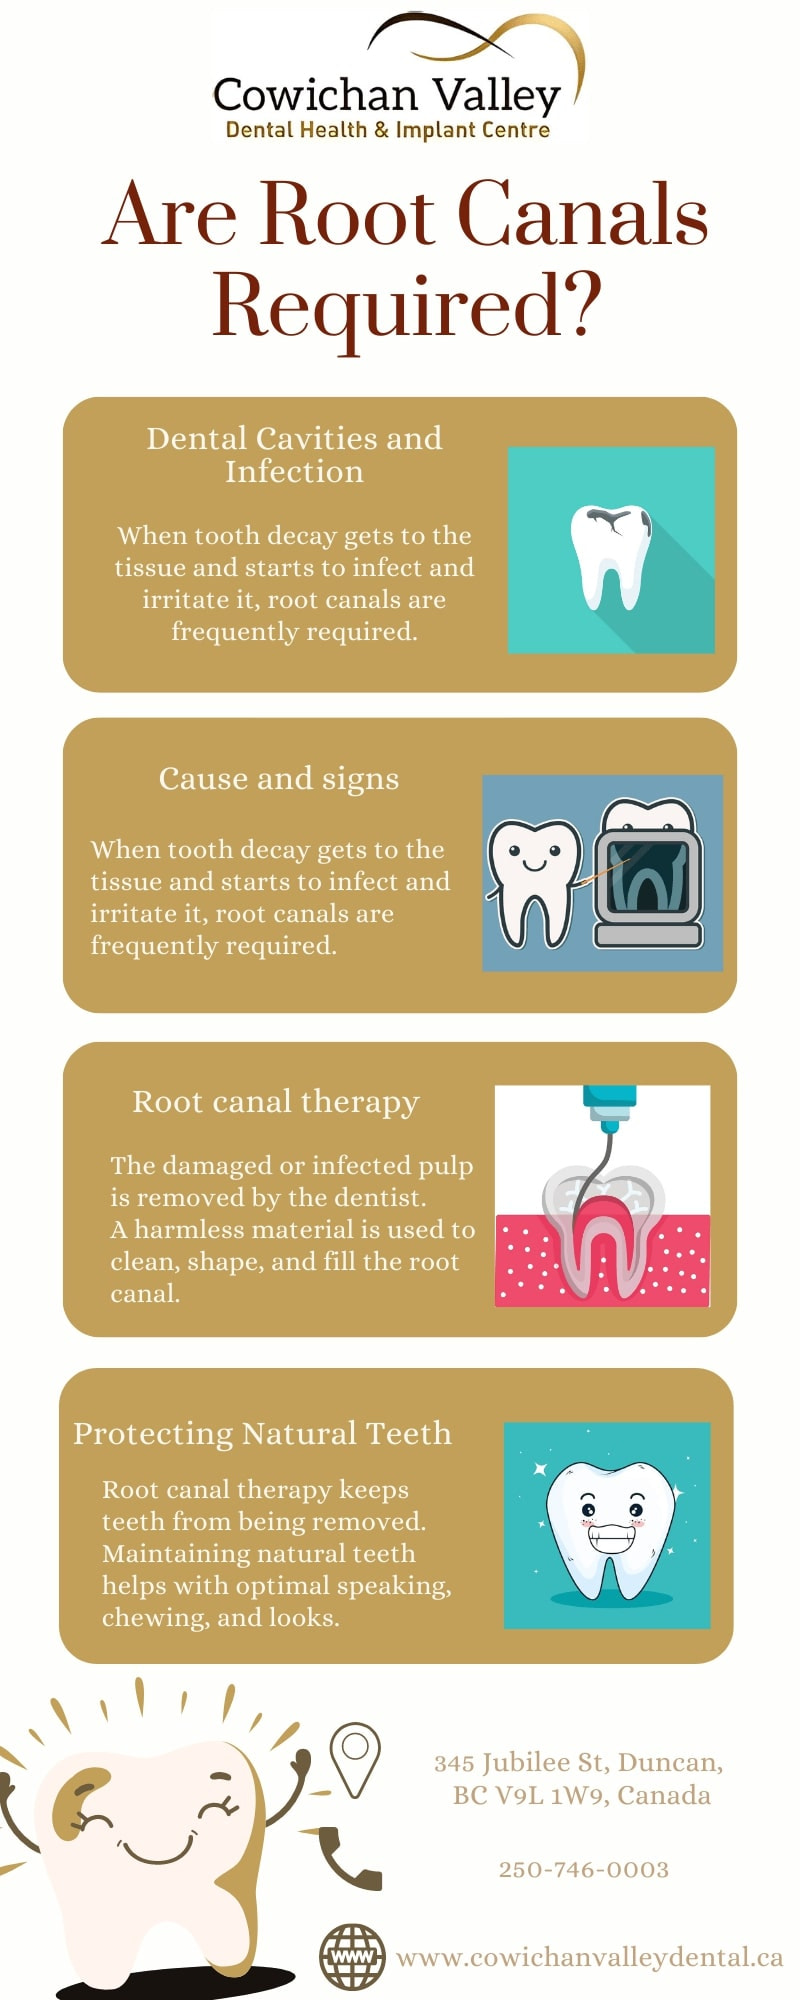 Are Root Canals Required